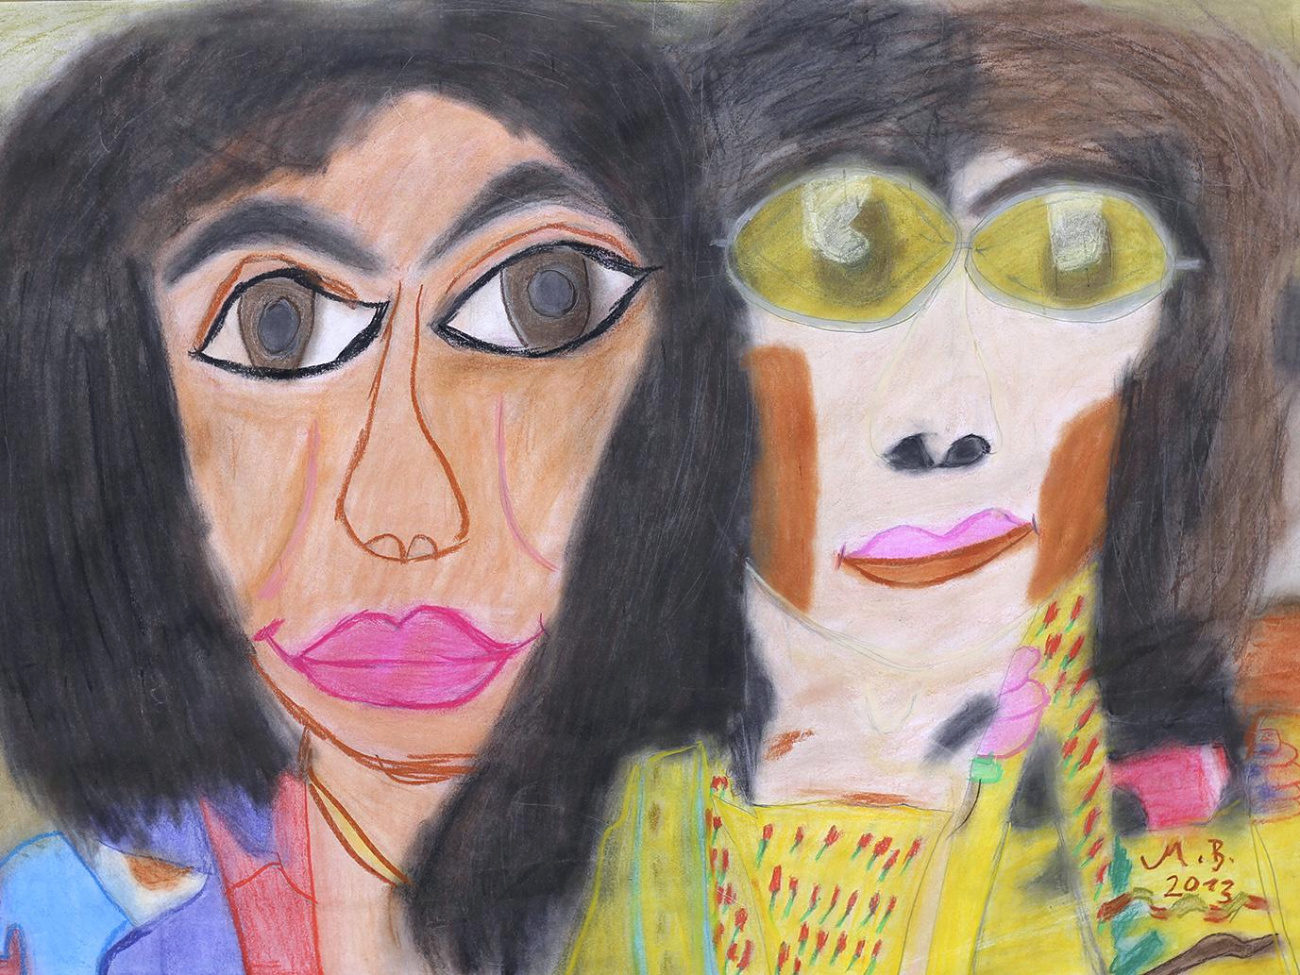 The artist Martina Beneke has painted an abstract version of Yoko Ono and John Lennon with pastels on paper.